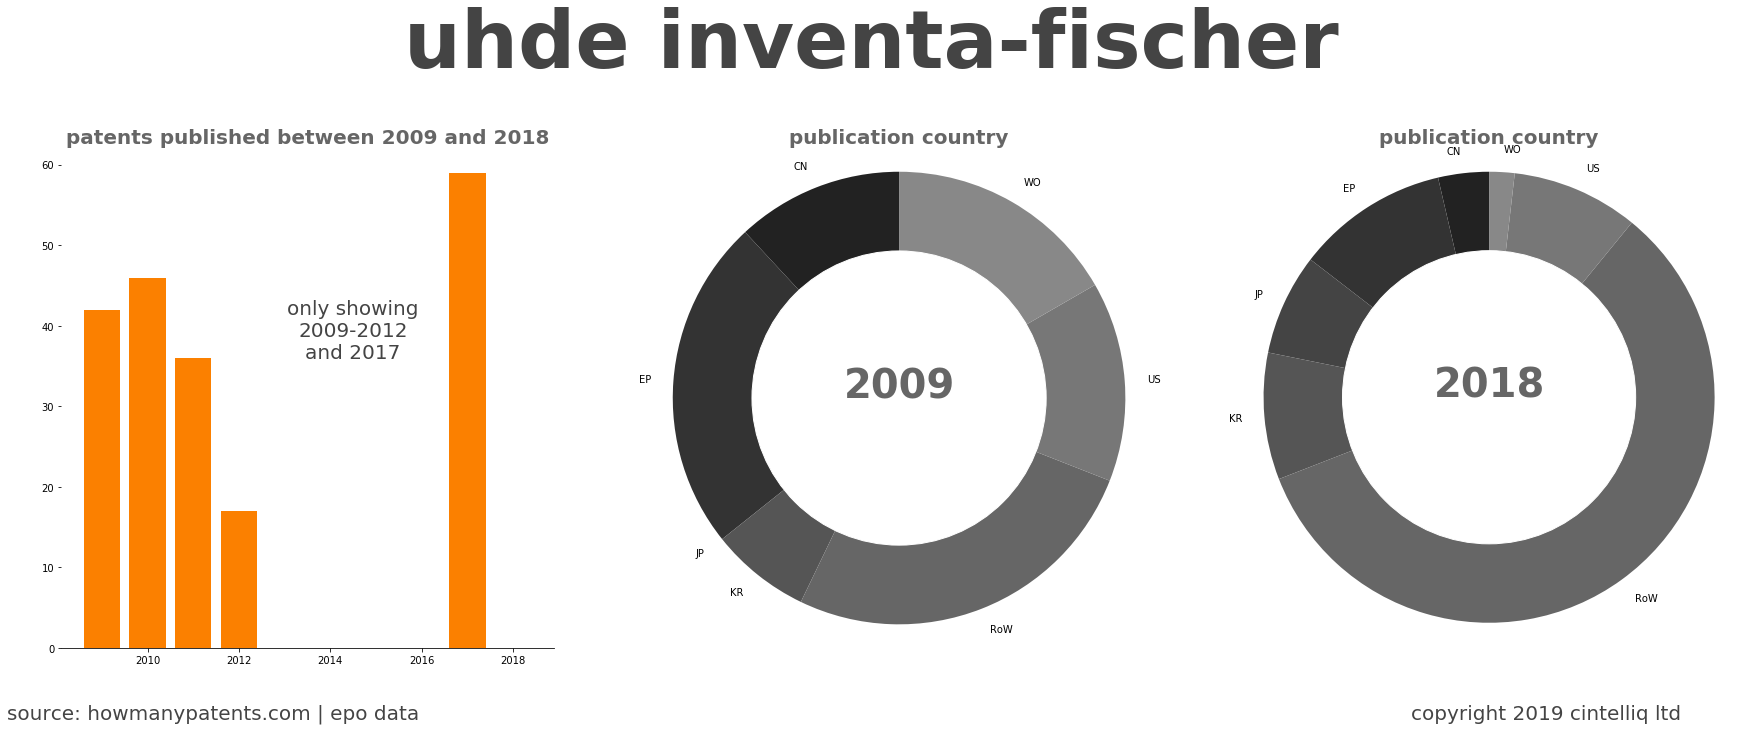 summary of patents for Uhde Inventa-Fischer